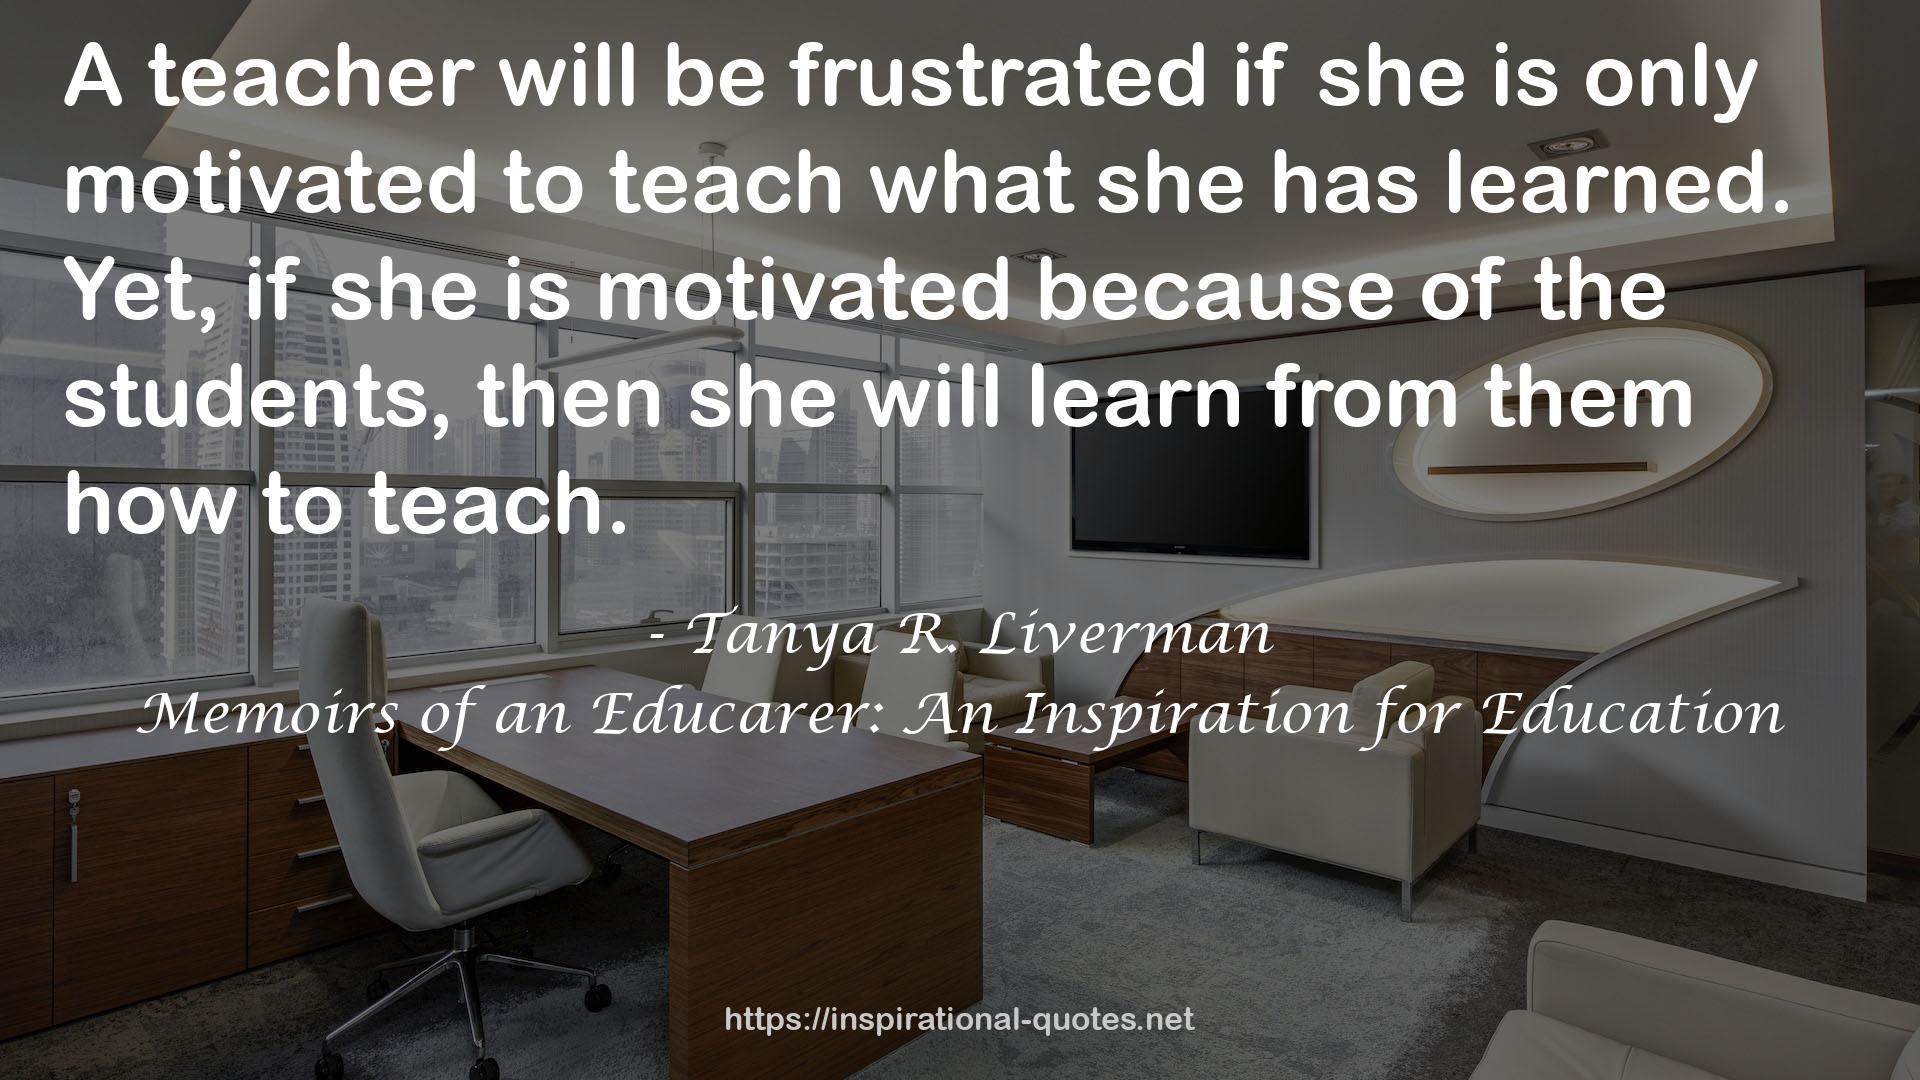 Memoirs of an Educarer: An Inspiration for Education QUOTES